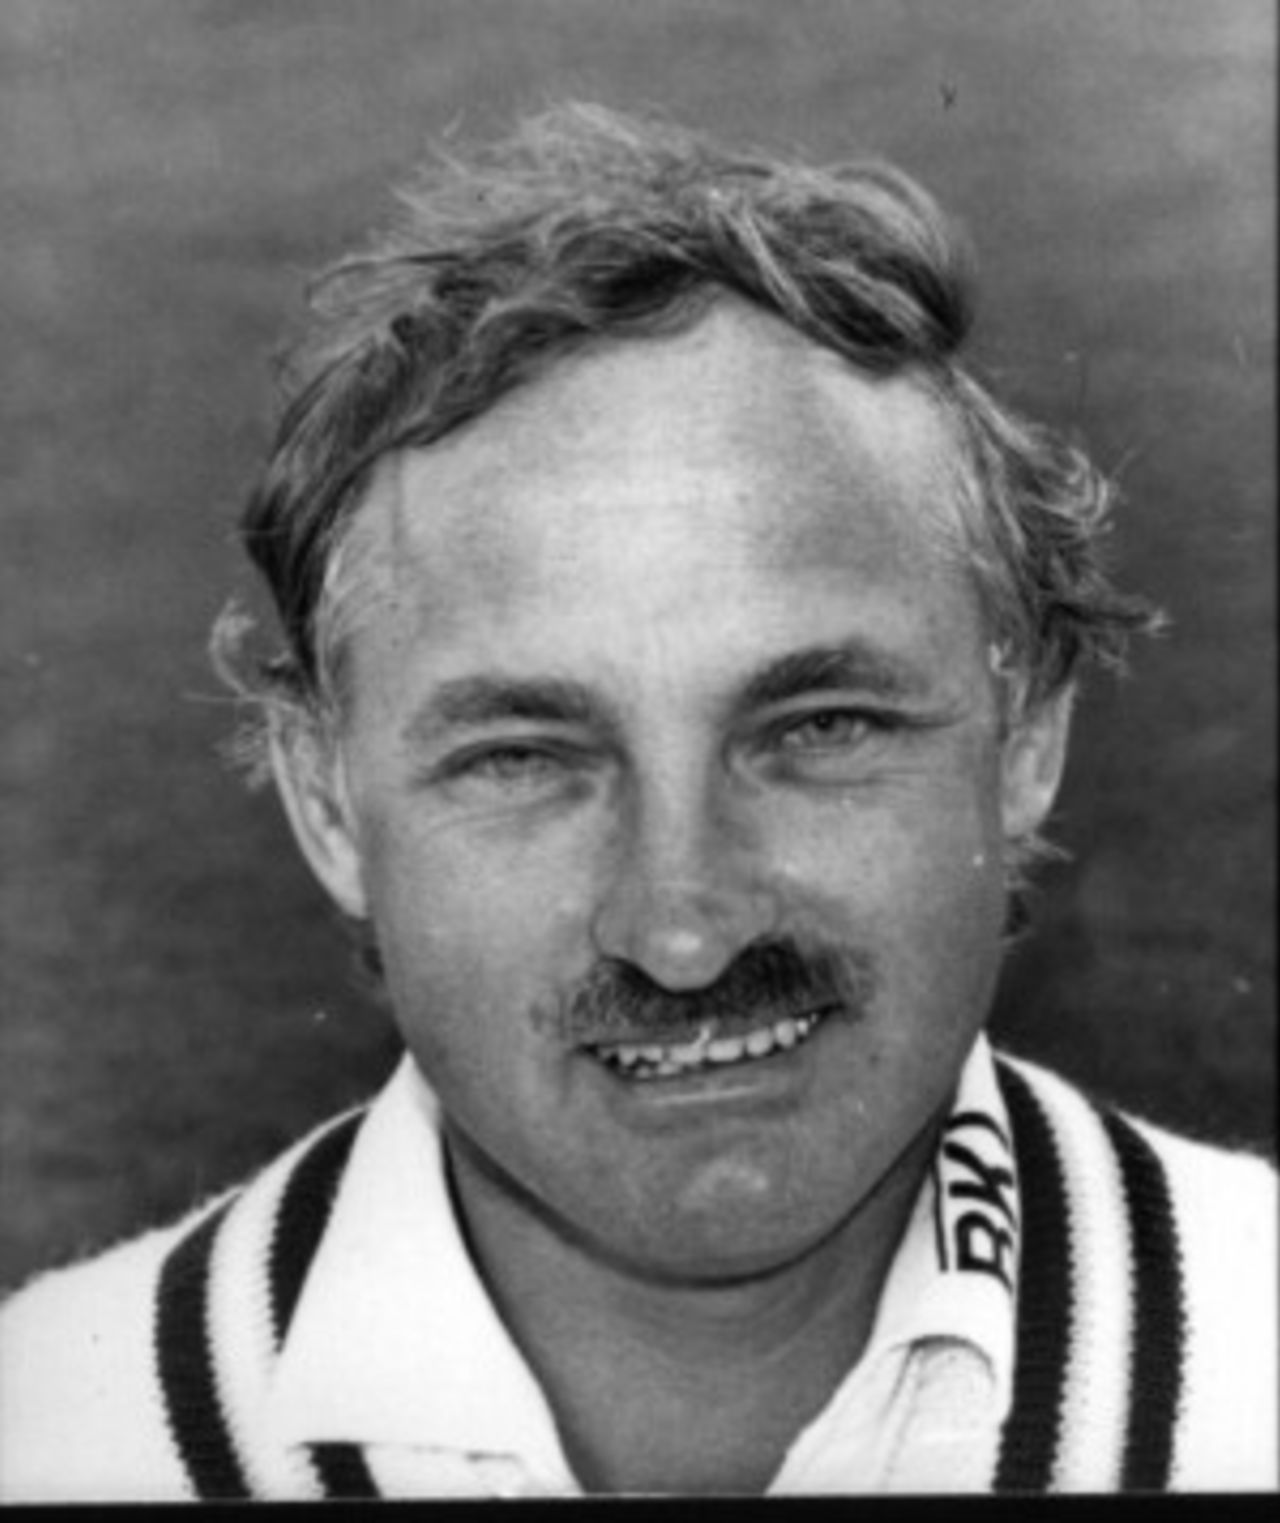 D.R. Turner, Hampshire cricketer 1966-1989